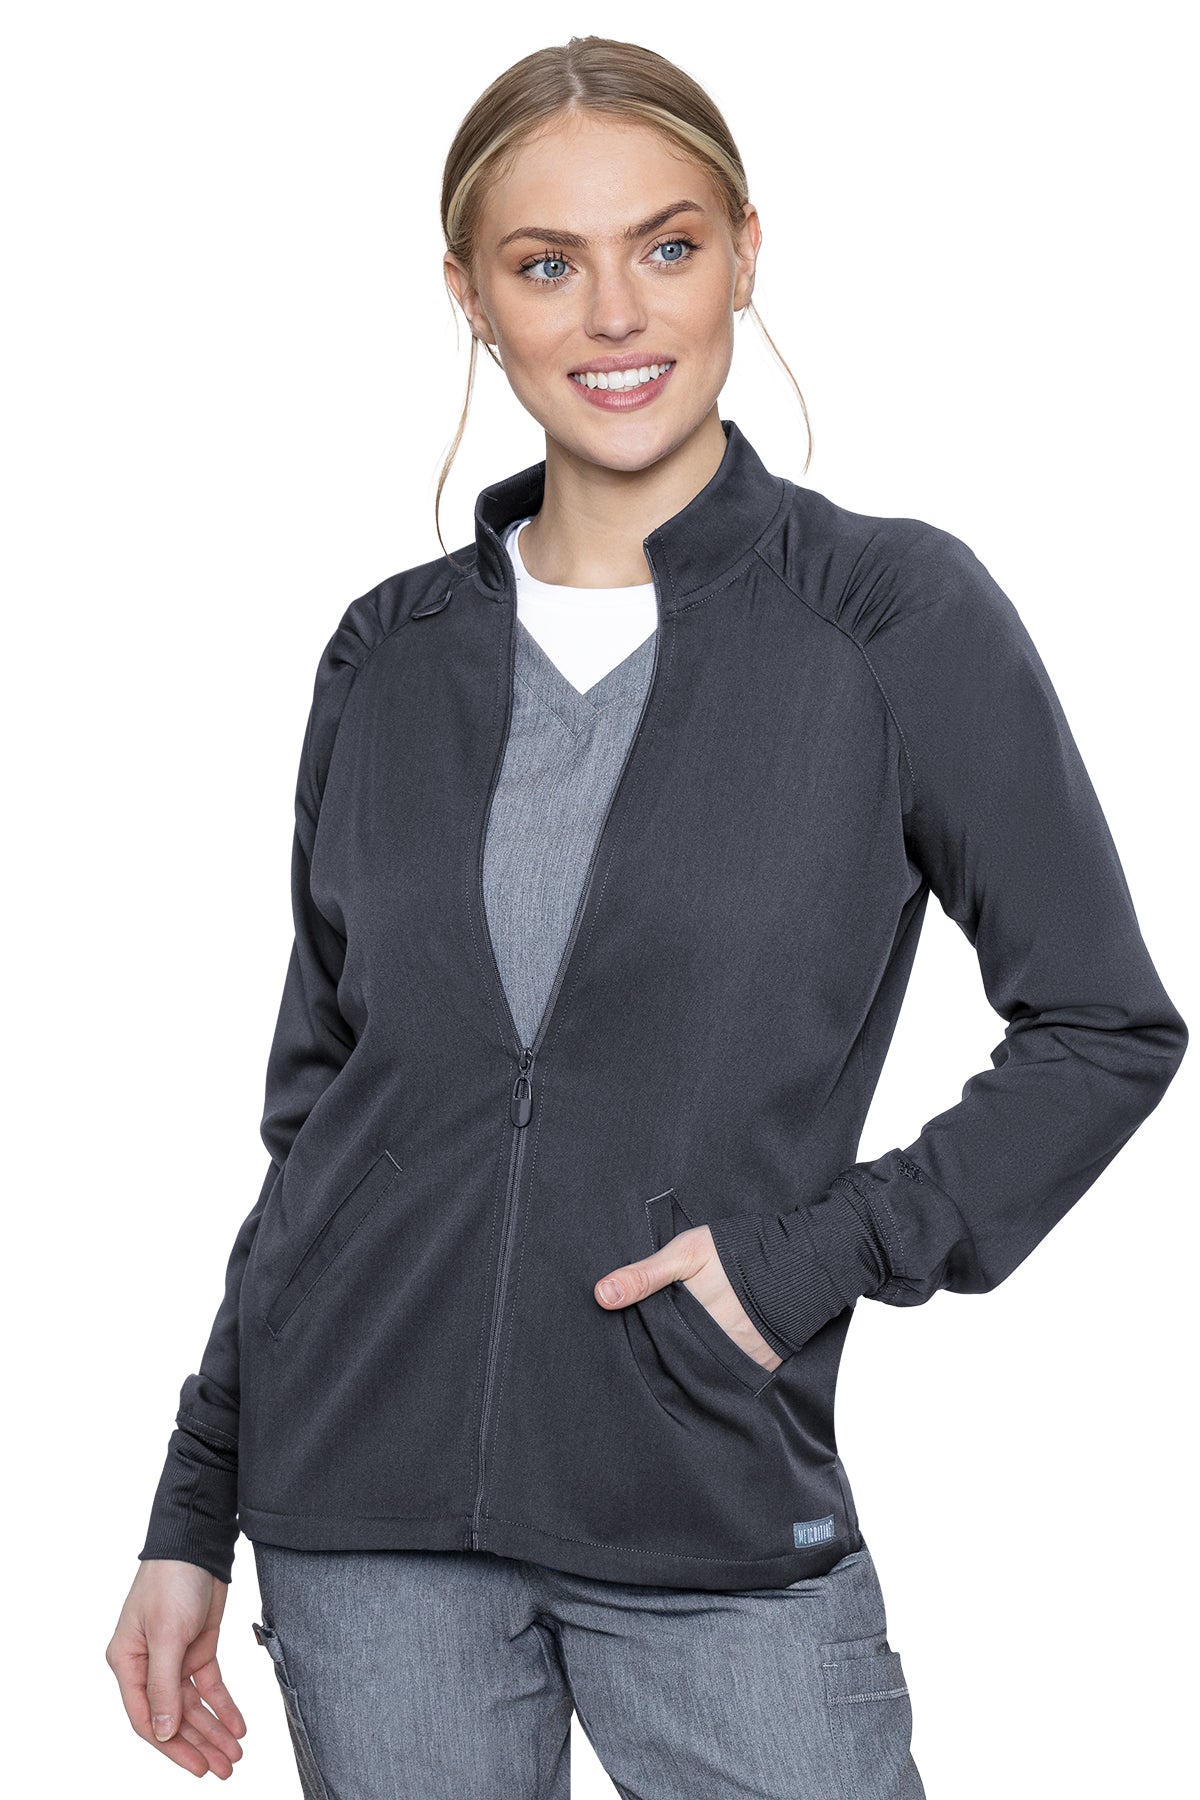 Raglan Warmup JACKET By Med Couture  XS-3XL / Pewter